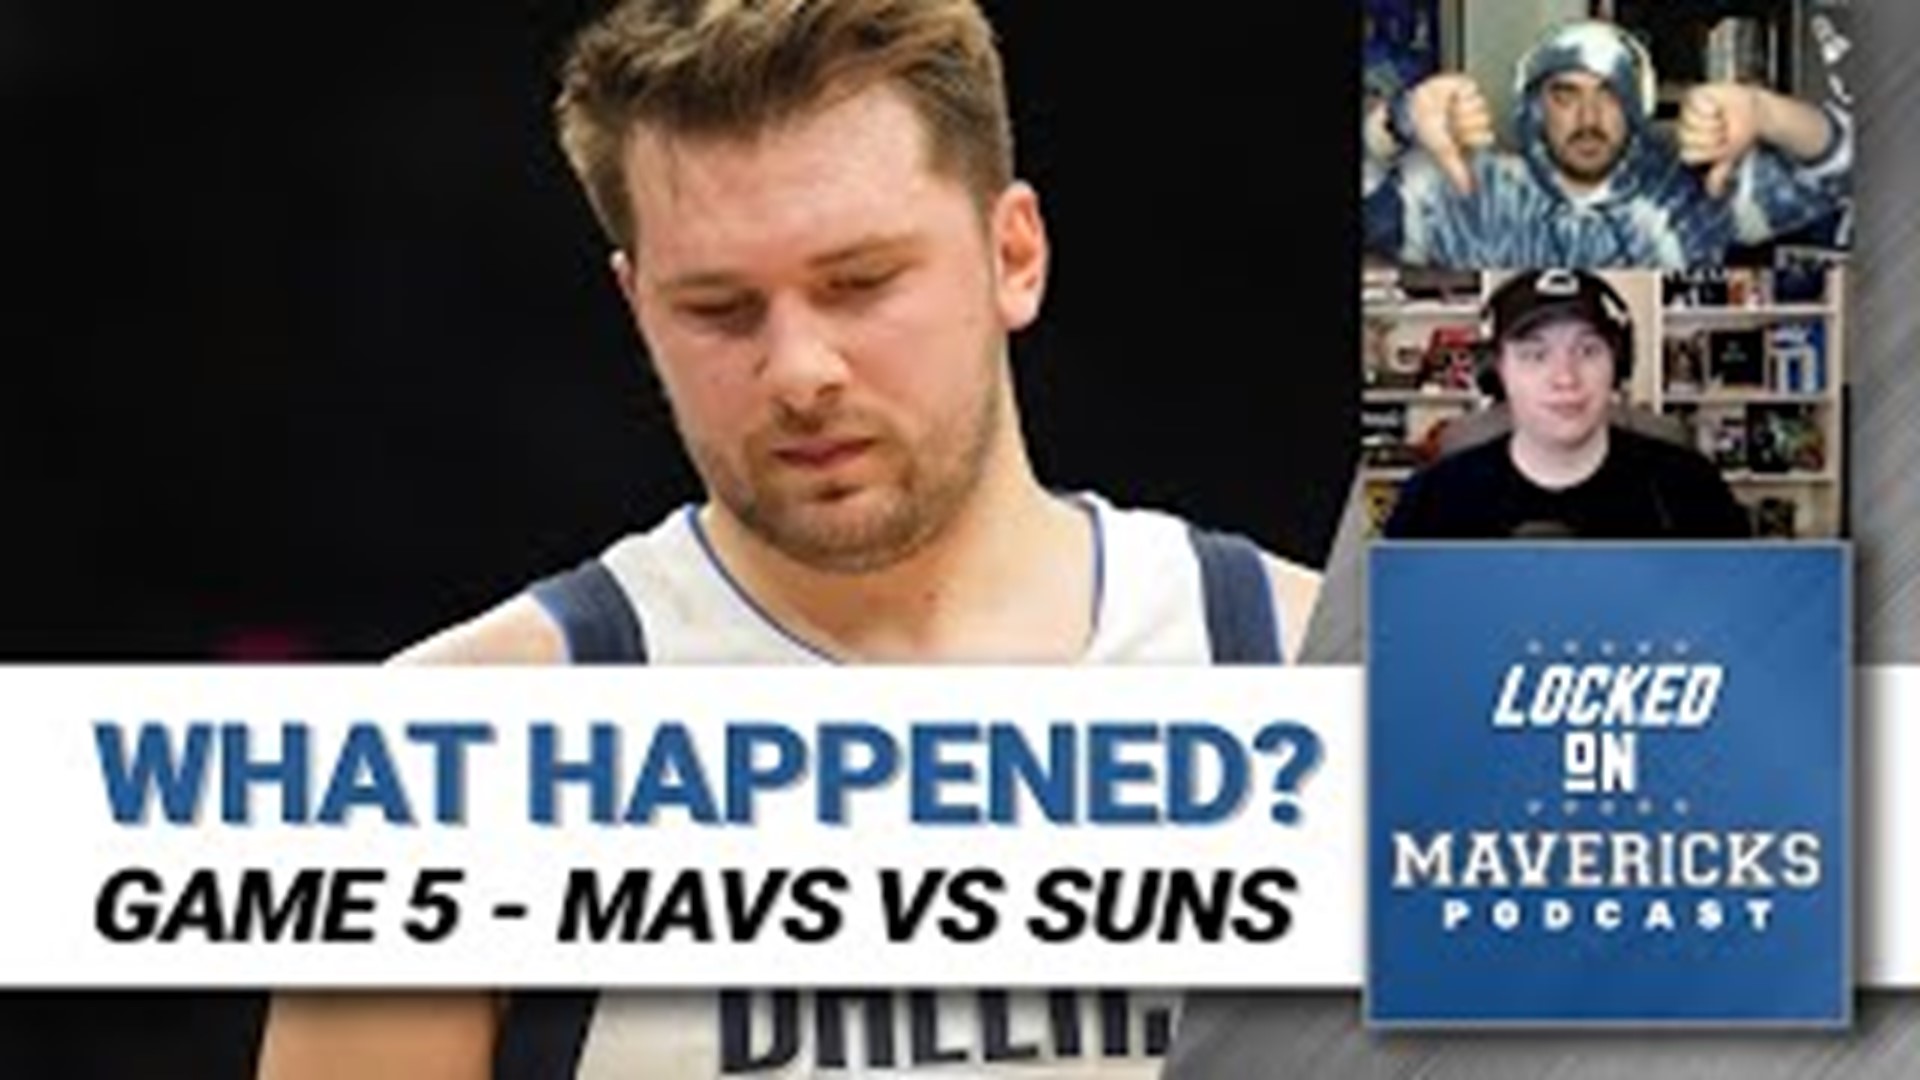 The Dallas Mavericks played terribly against the Phoenix Suns in Game 5 of their Playoff Series... but just how bad was it? That and more on Locked on Mavericks